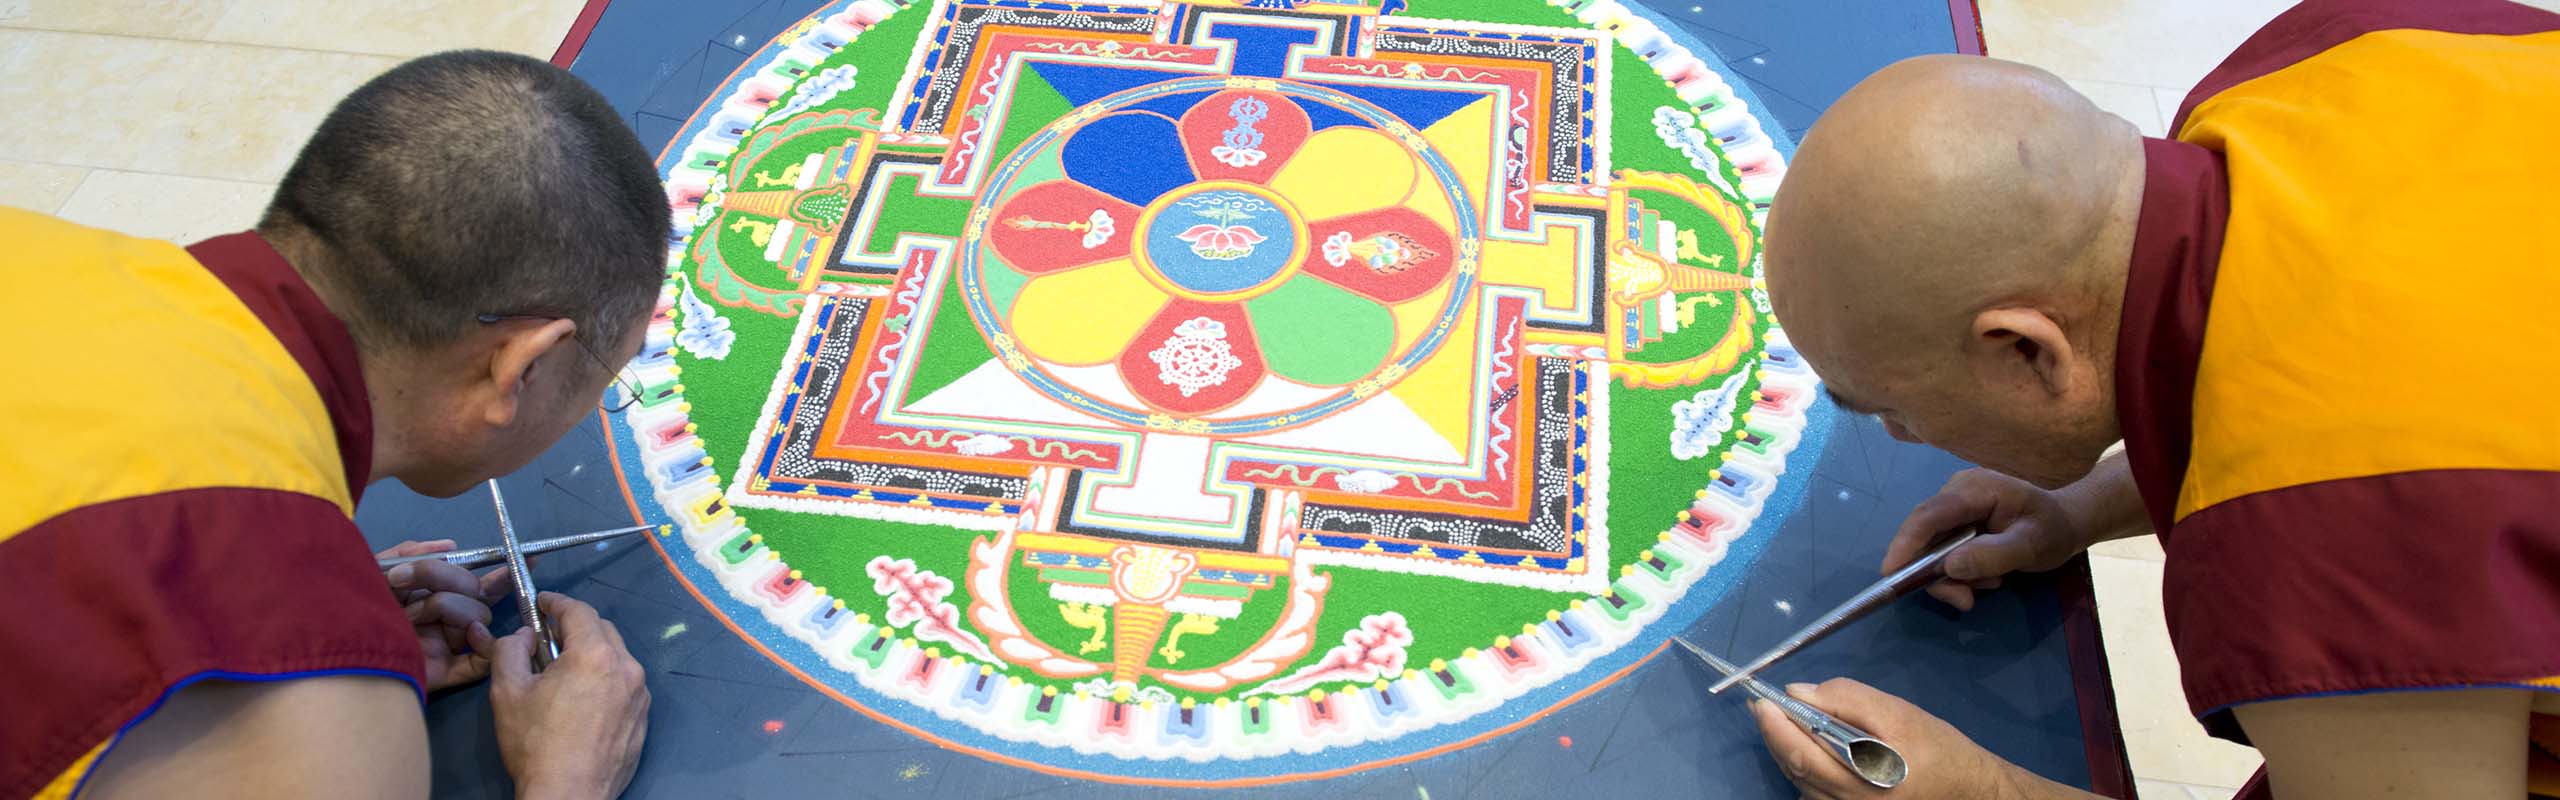 Buddhist monks from the Kadampa Center in Raleigh, visited Elon for three days to create a sand mandala in the Sacred Space of the Numen Lumen Pavilion.